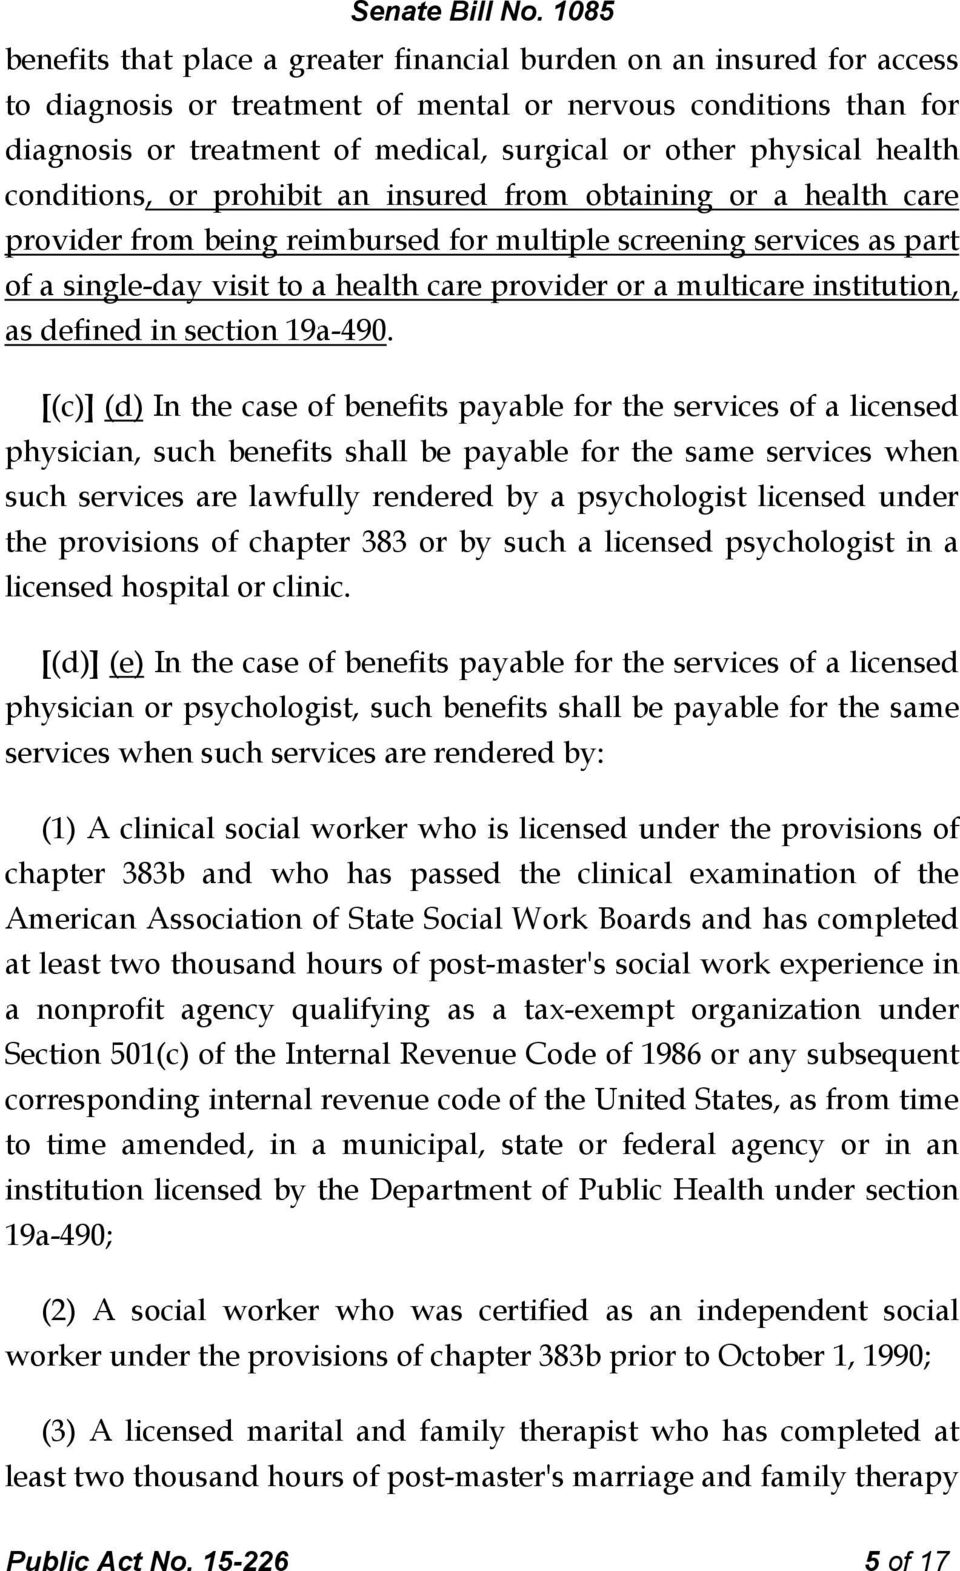 provider or a multicare institution, as defined in section 19a-490.